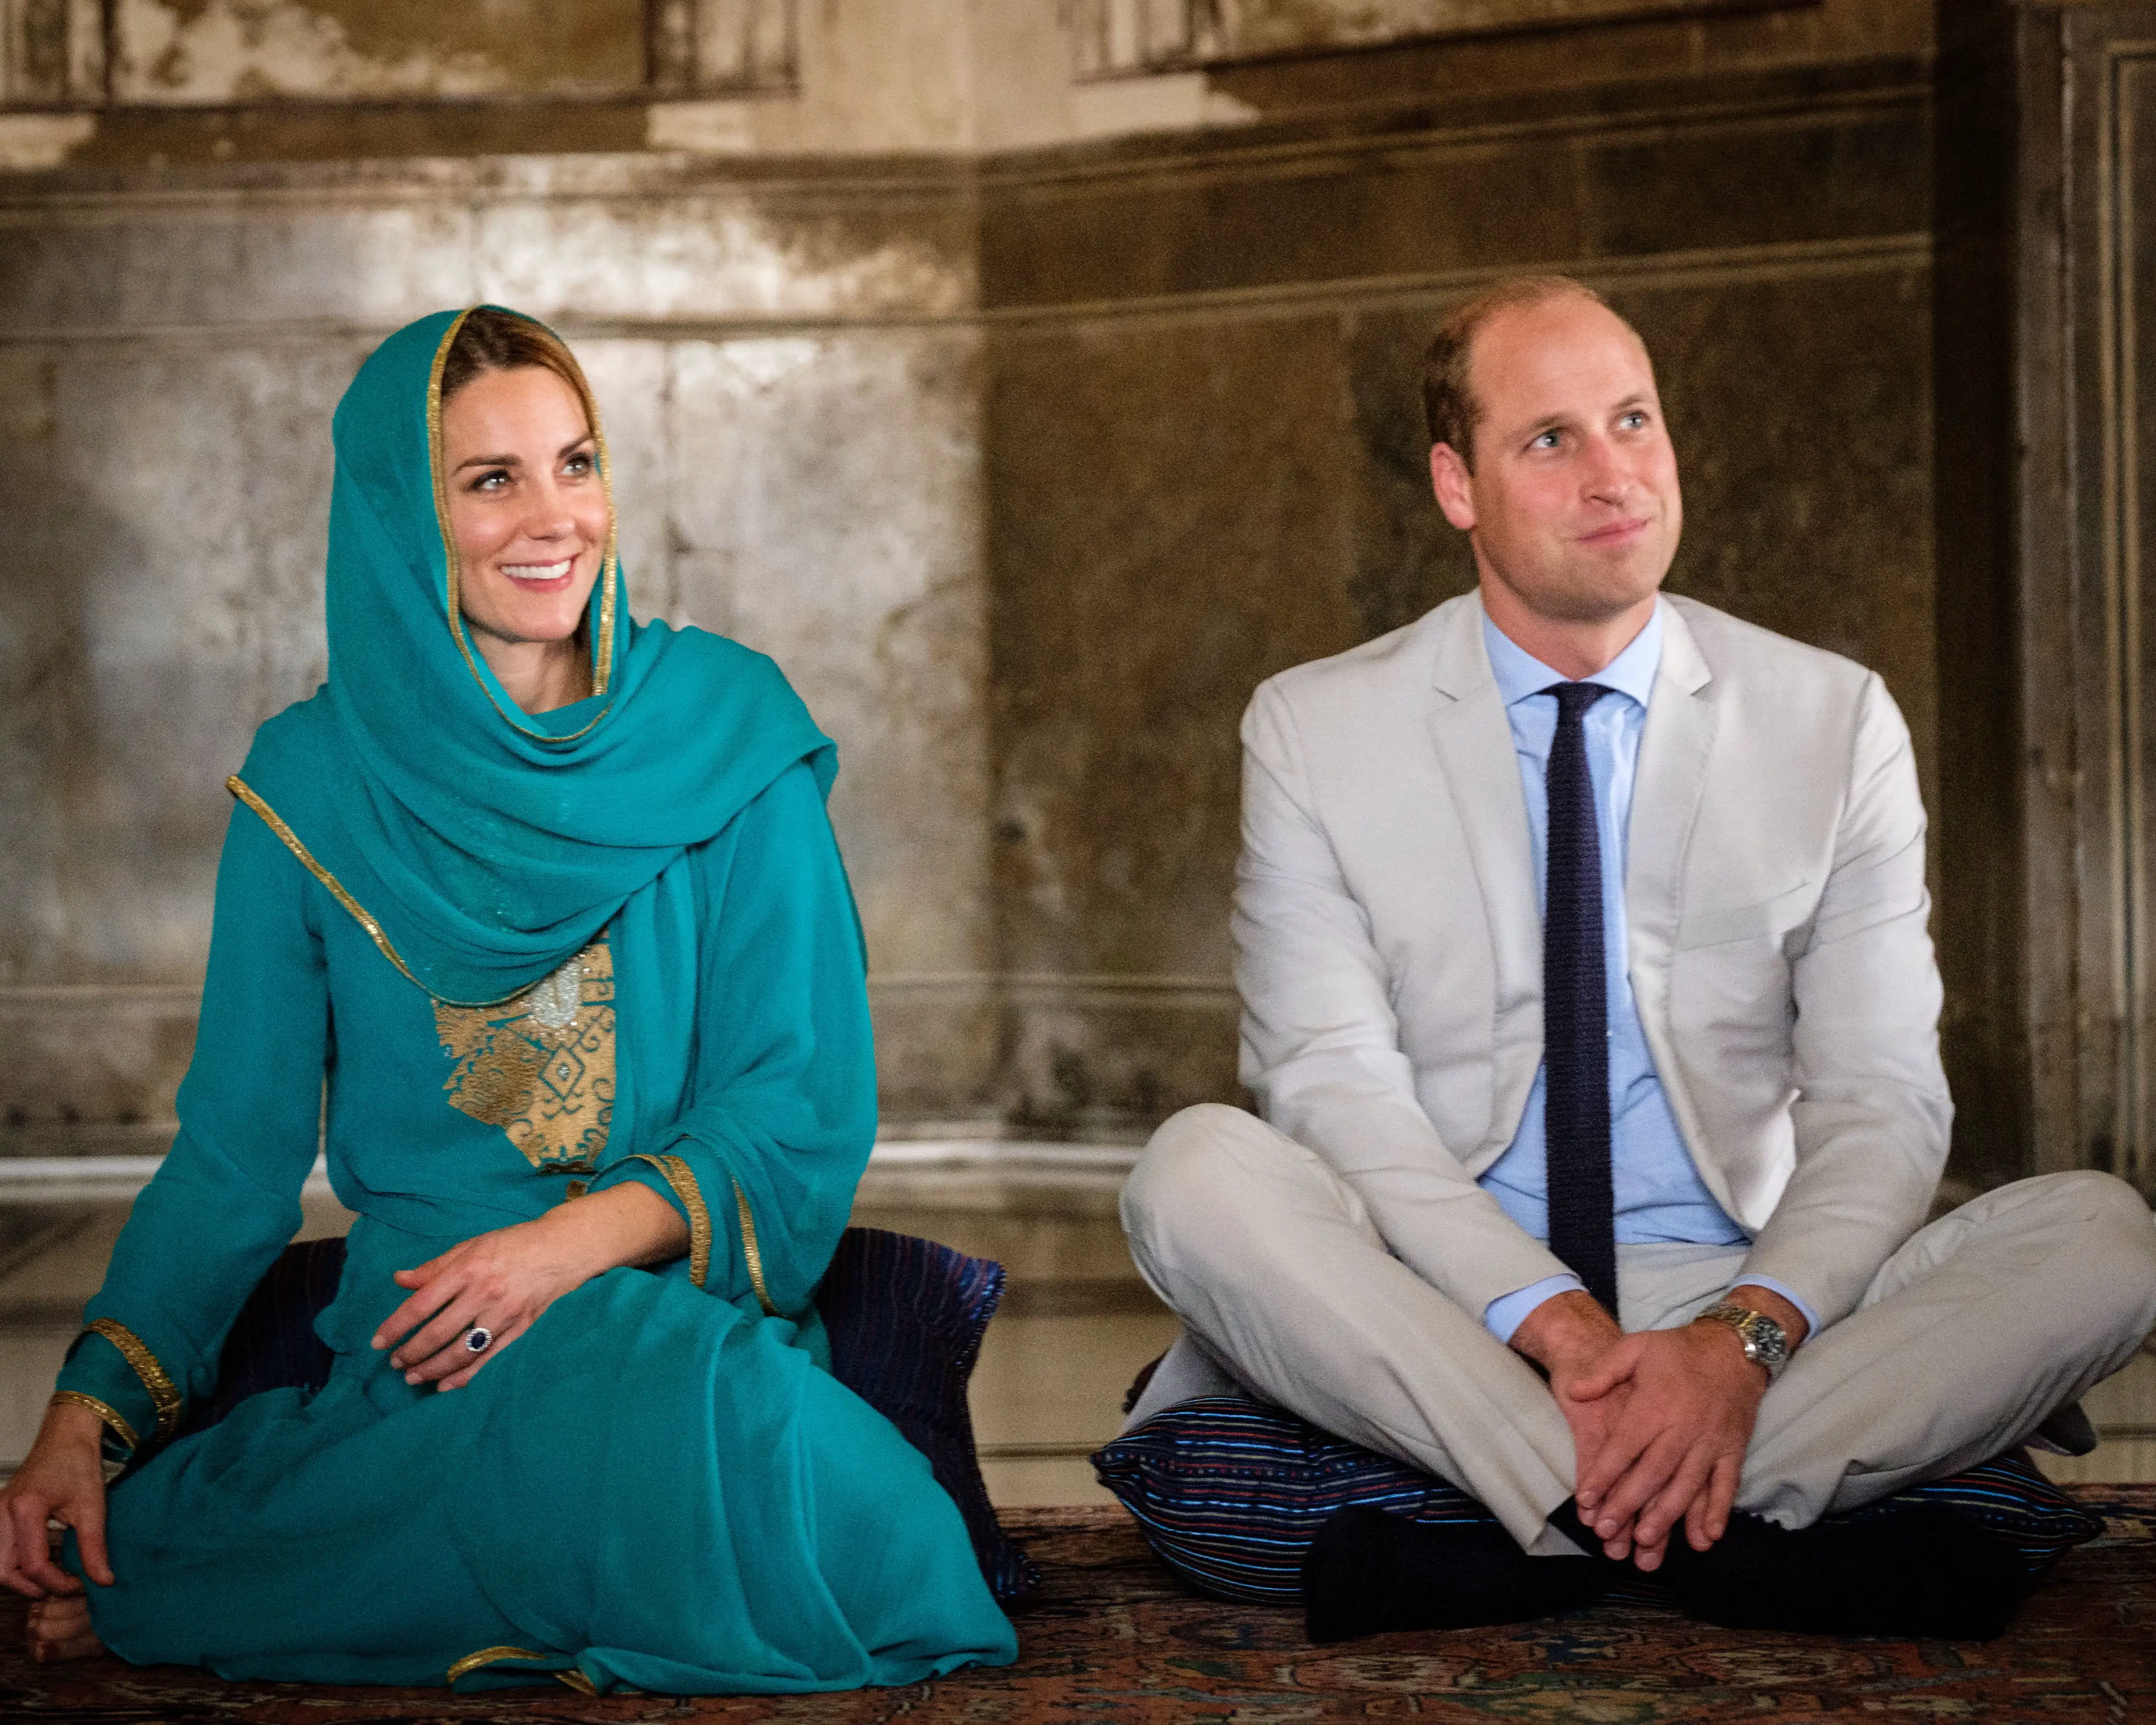 The Duke and Duchess of Cambridge visited Iconic Badshahi Mosque in Lahore Pakistan during Royal tour